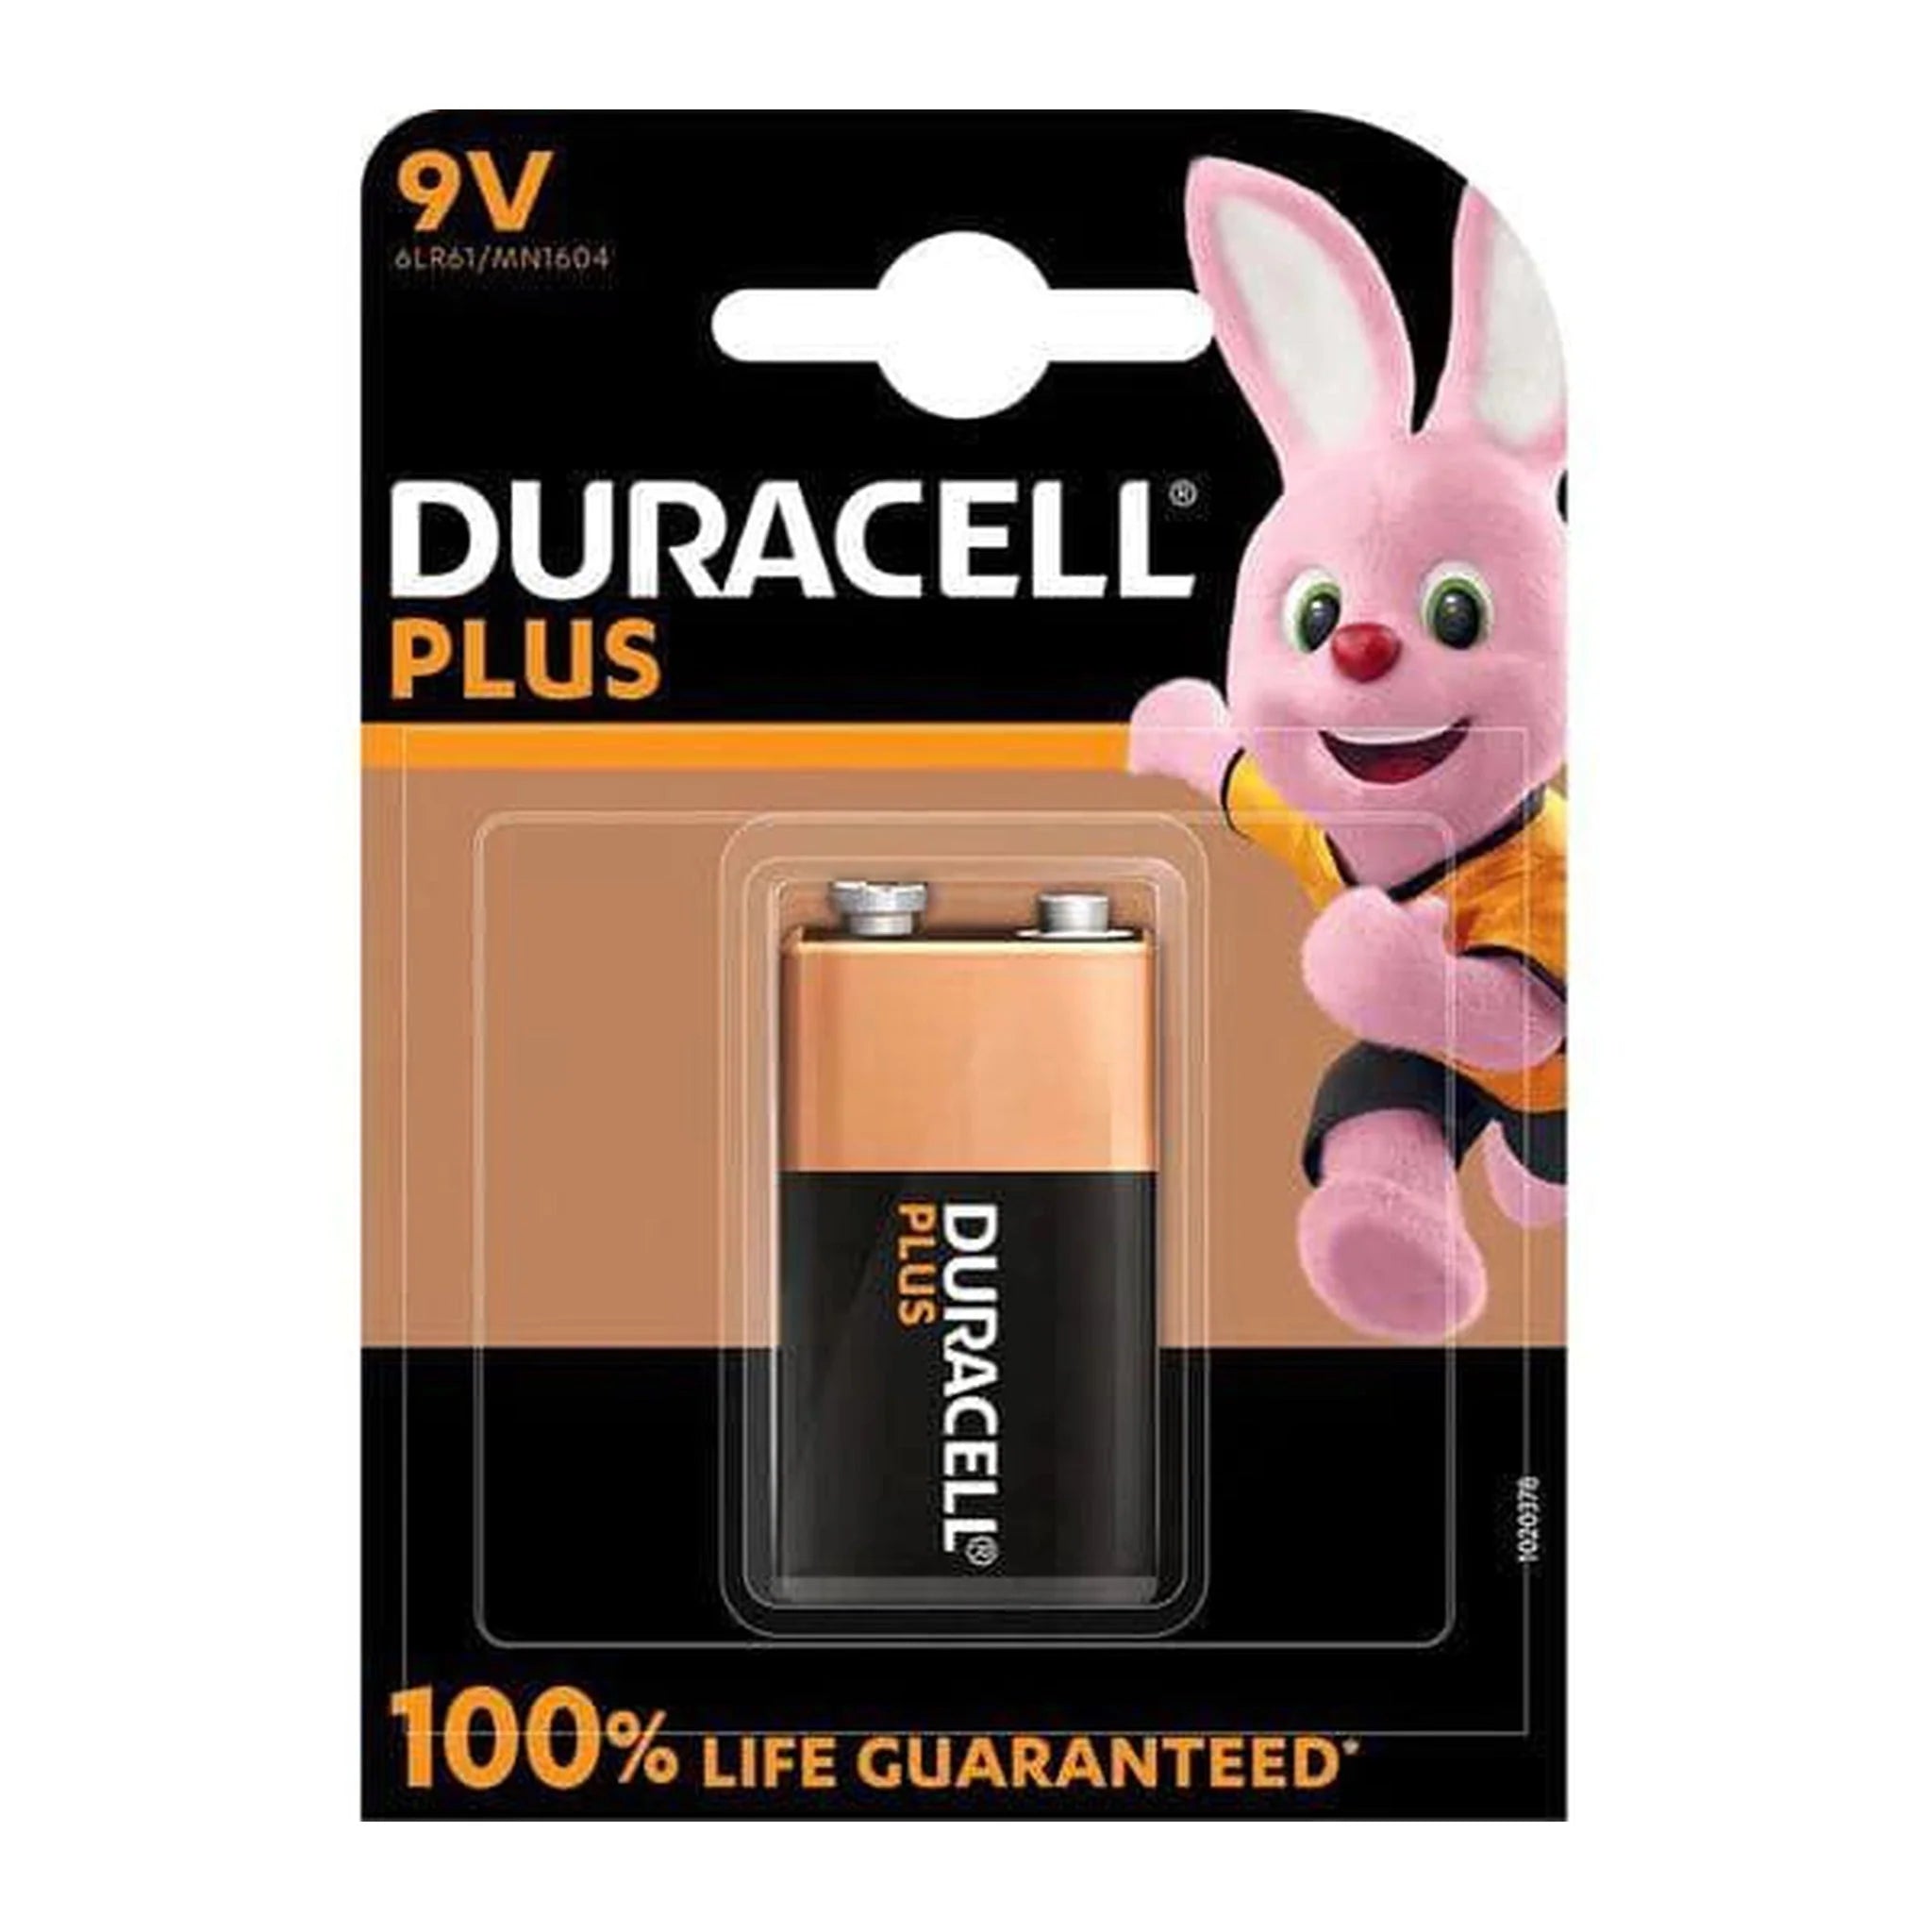 DURACELL Plus 9V Alkaline Battery - Kids Party Craft